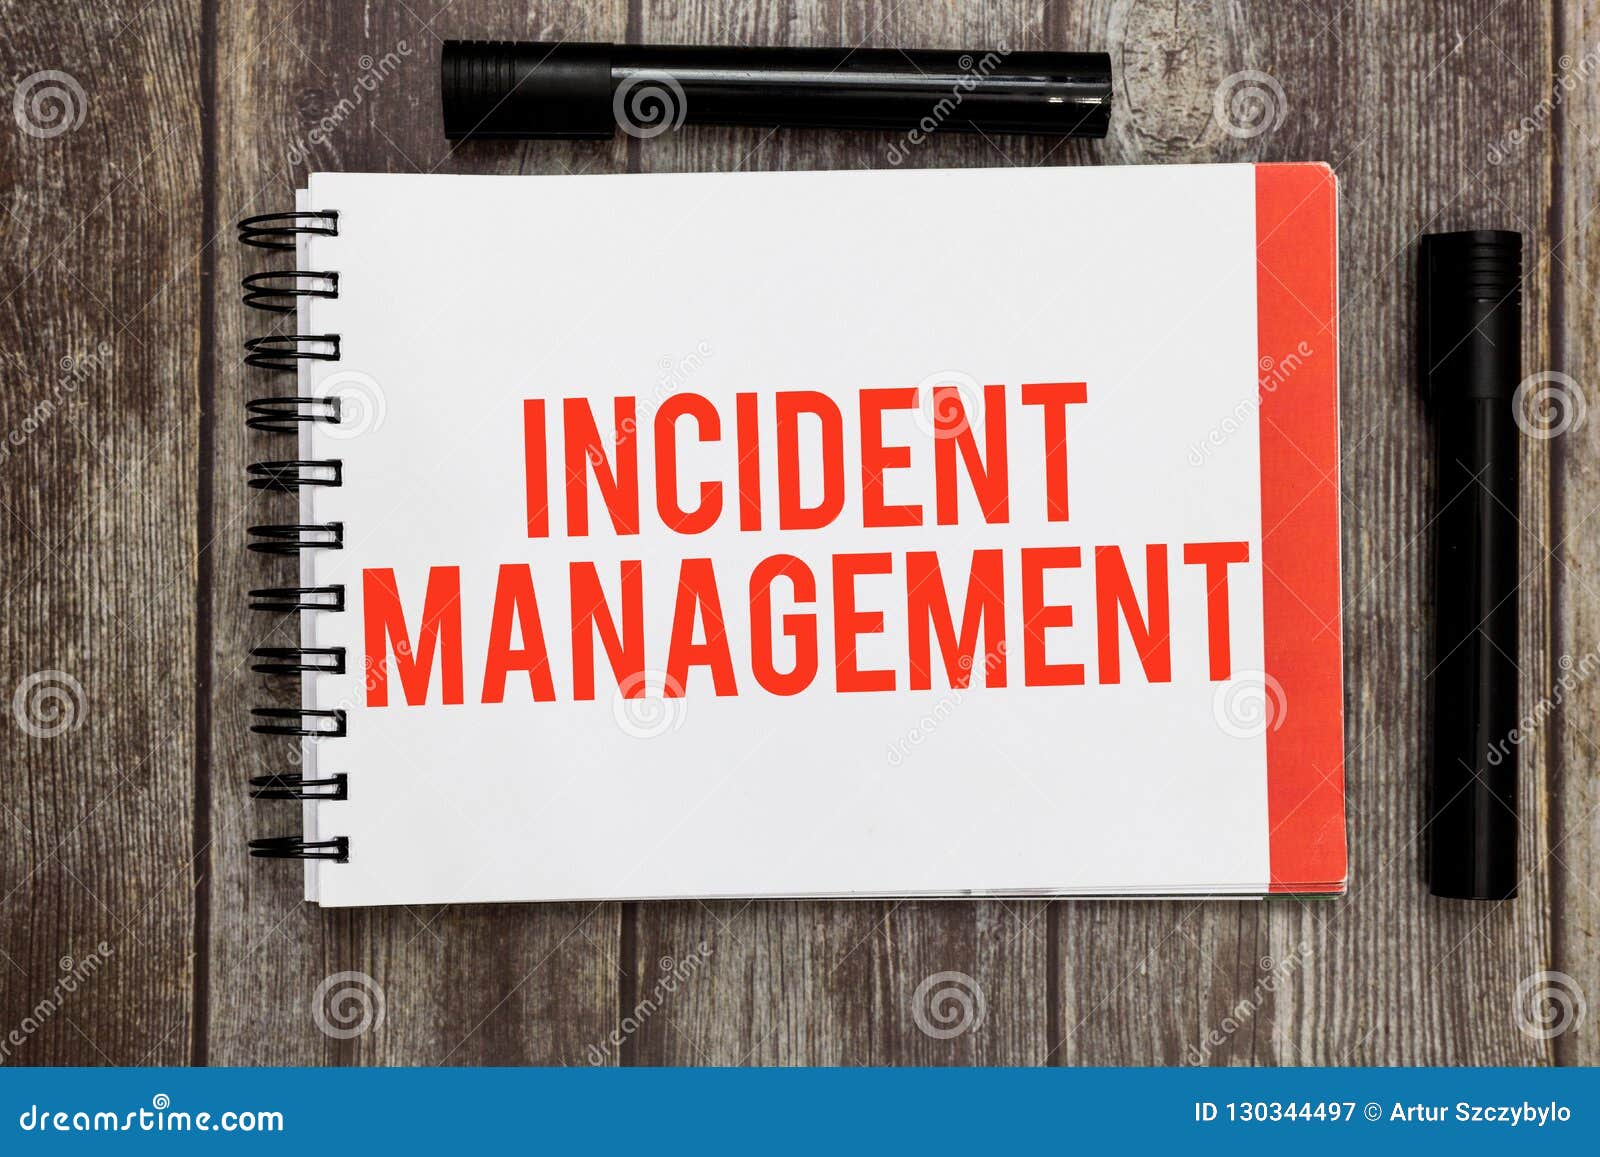 word writing text incident management. business concept for process to return service to normal correct hazards